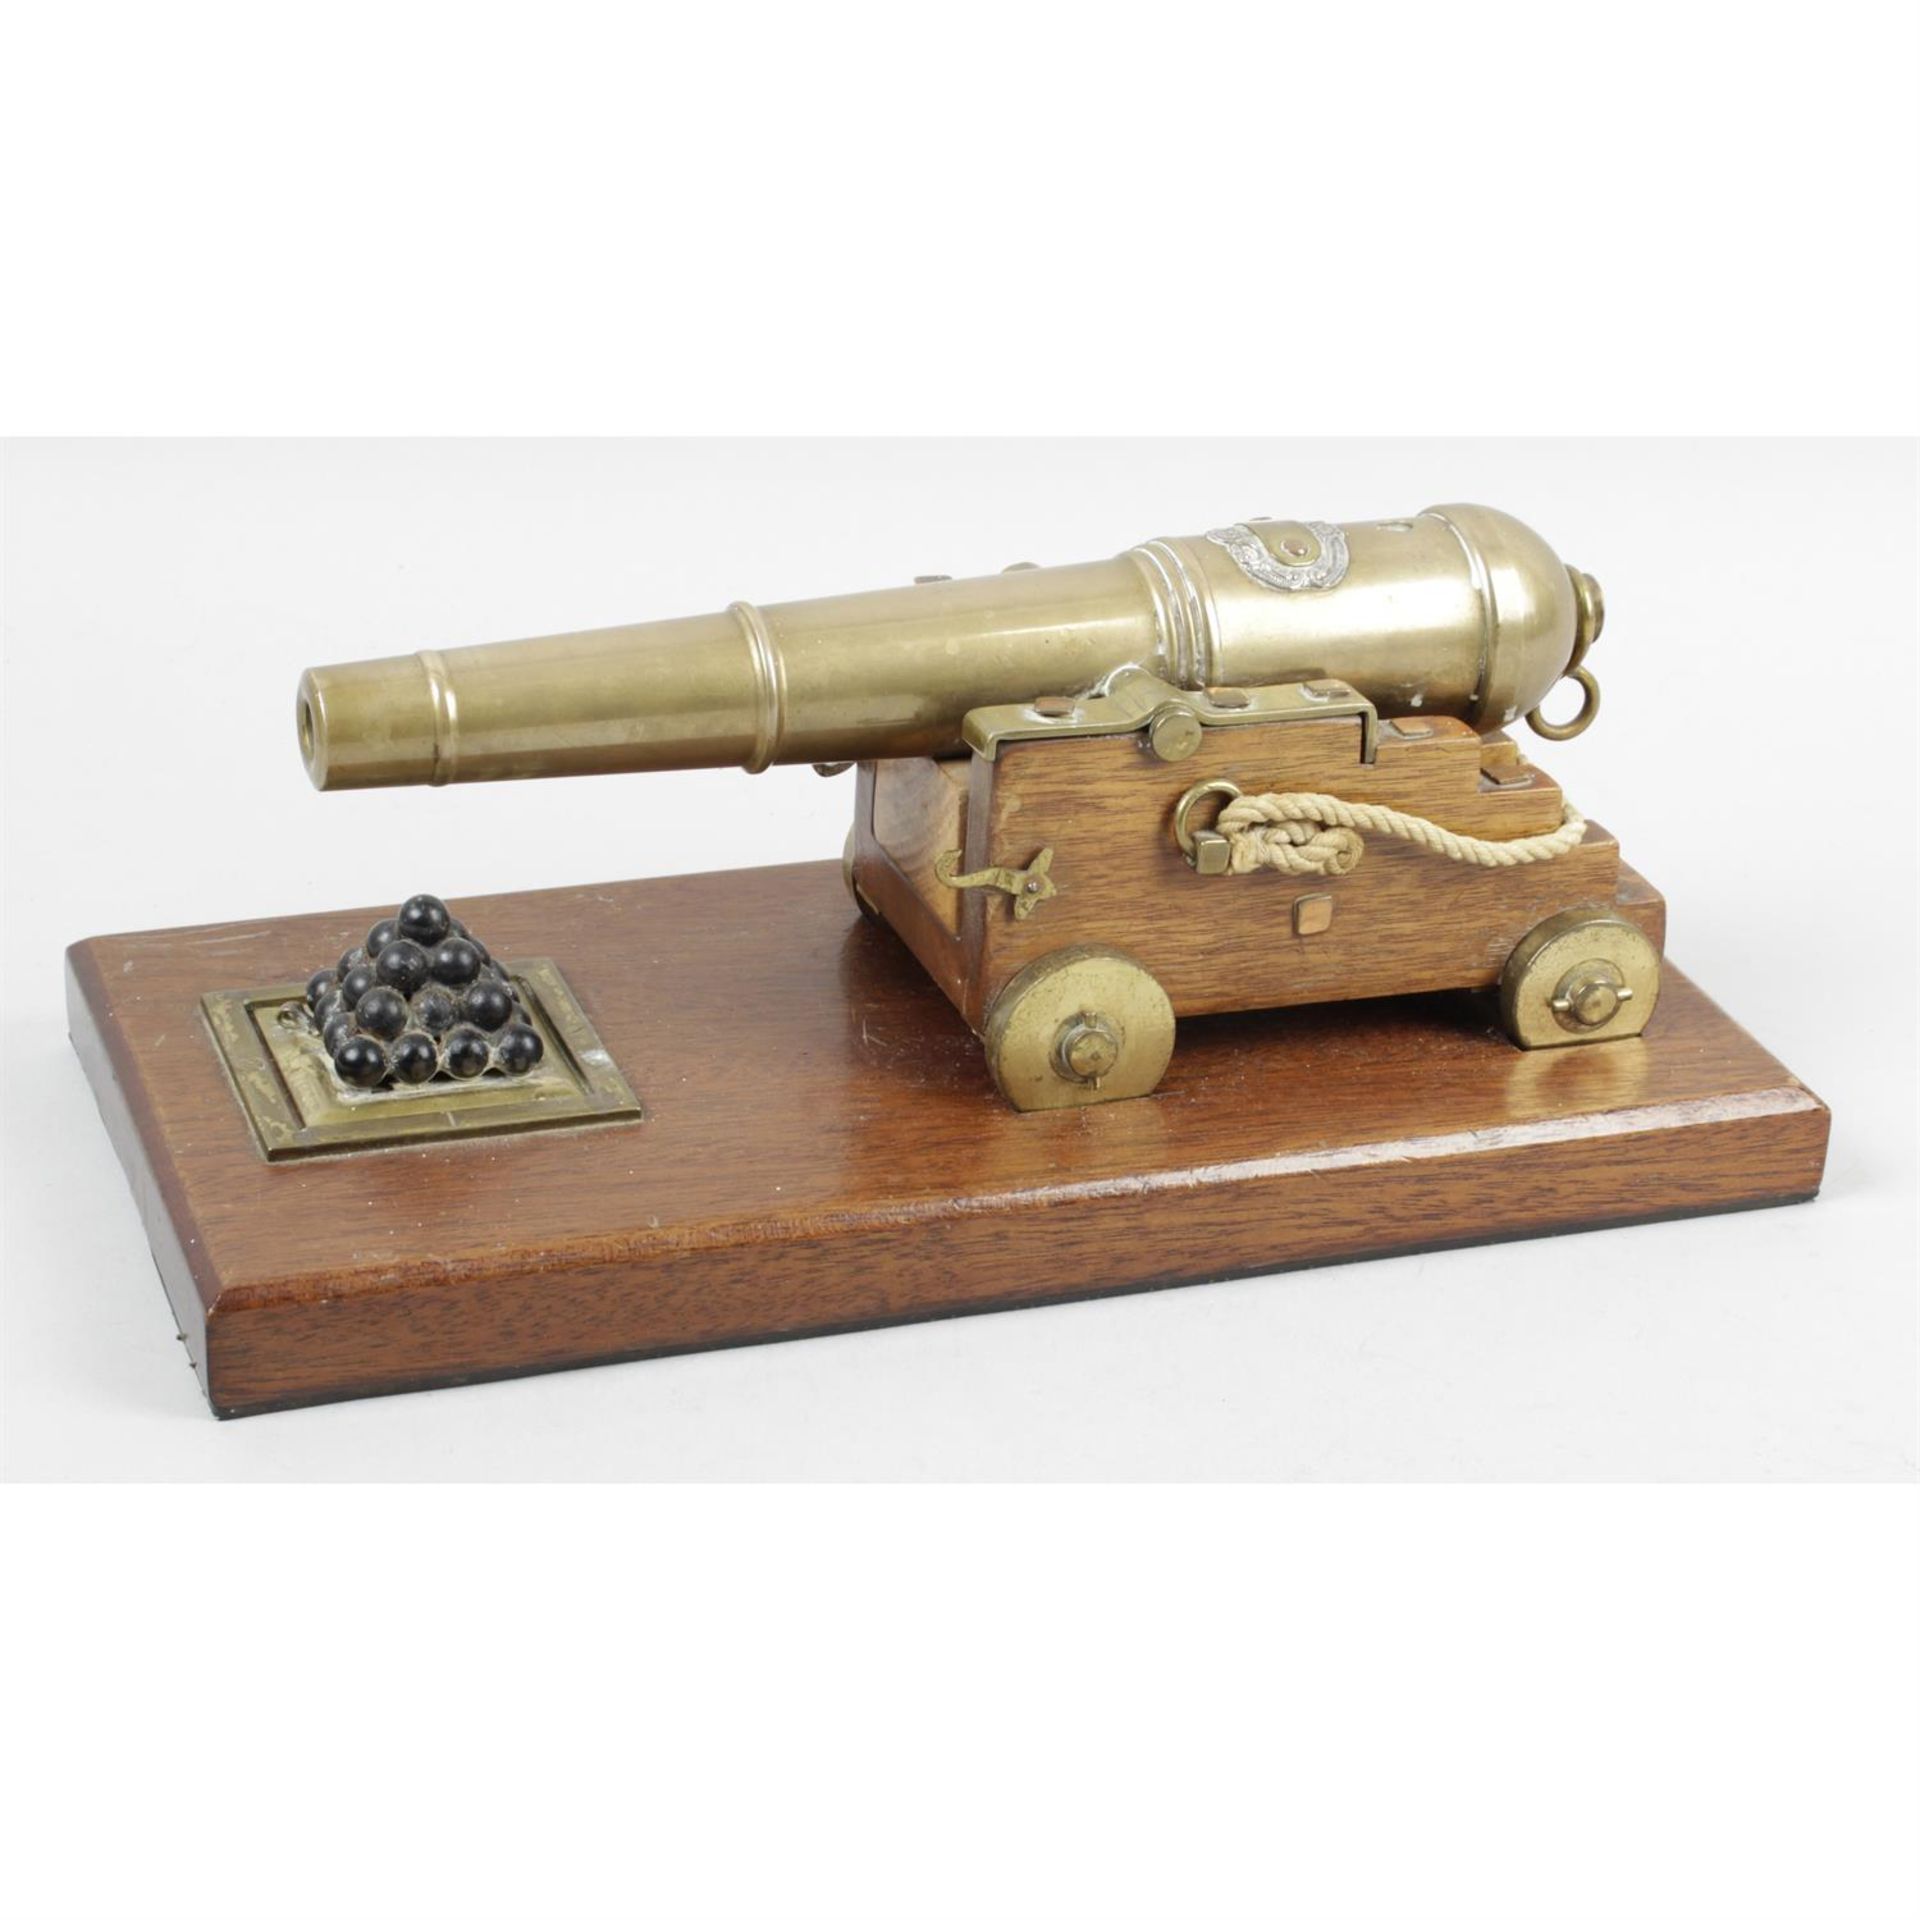 An early 20th century library desk model of a naval cannon.